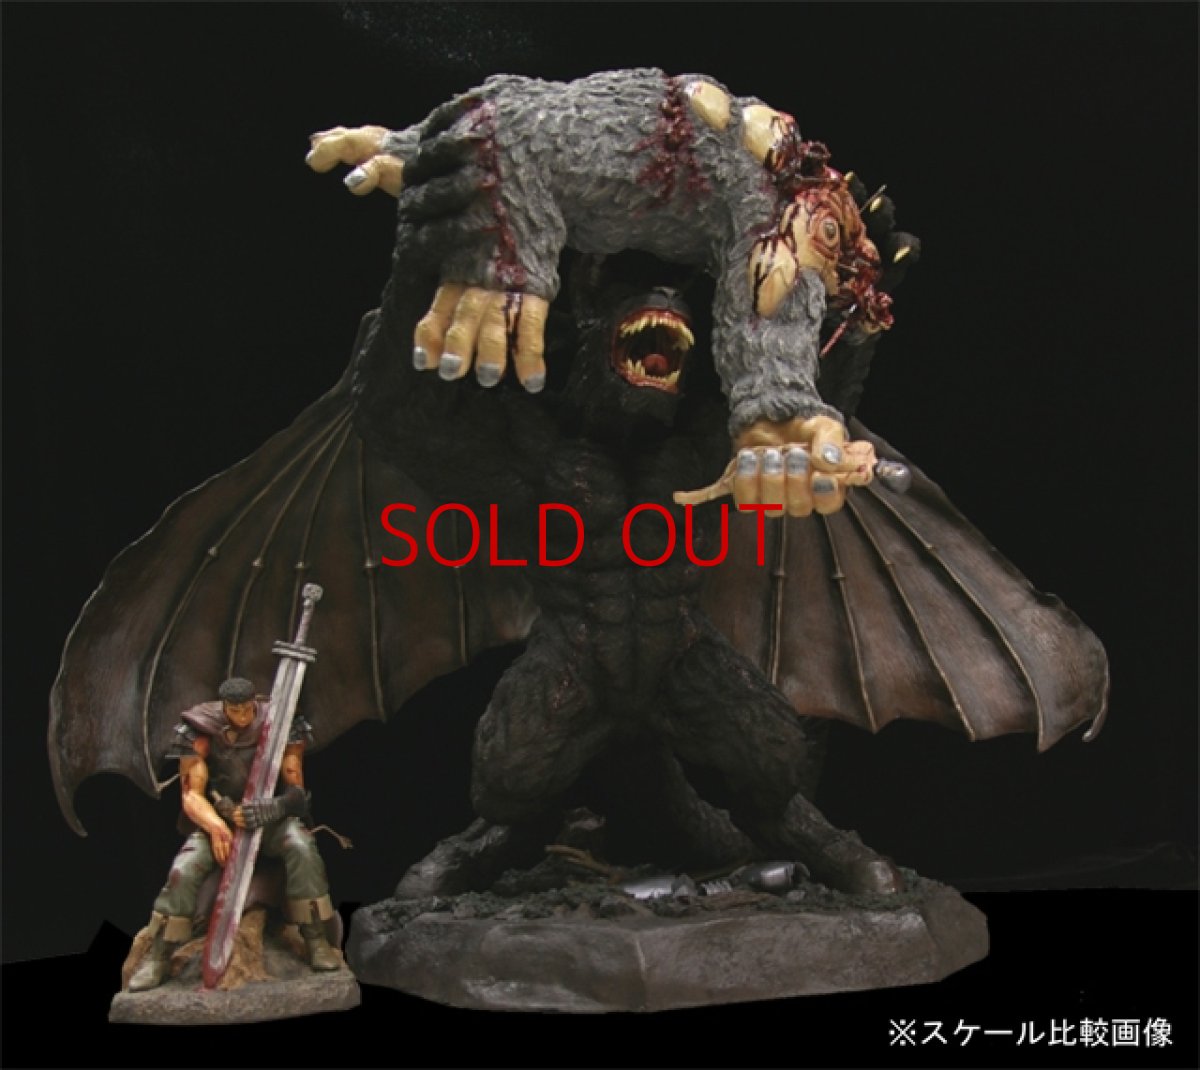 Photo1: No. 187 ZODD&WYALD Exclusive Version 2 w/Guts:The Hundred Man Killer Set*sold out (1)